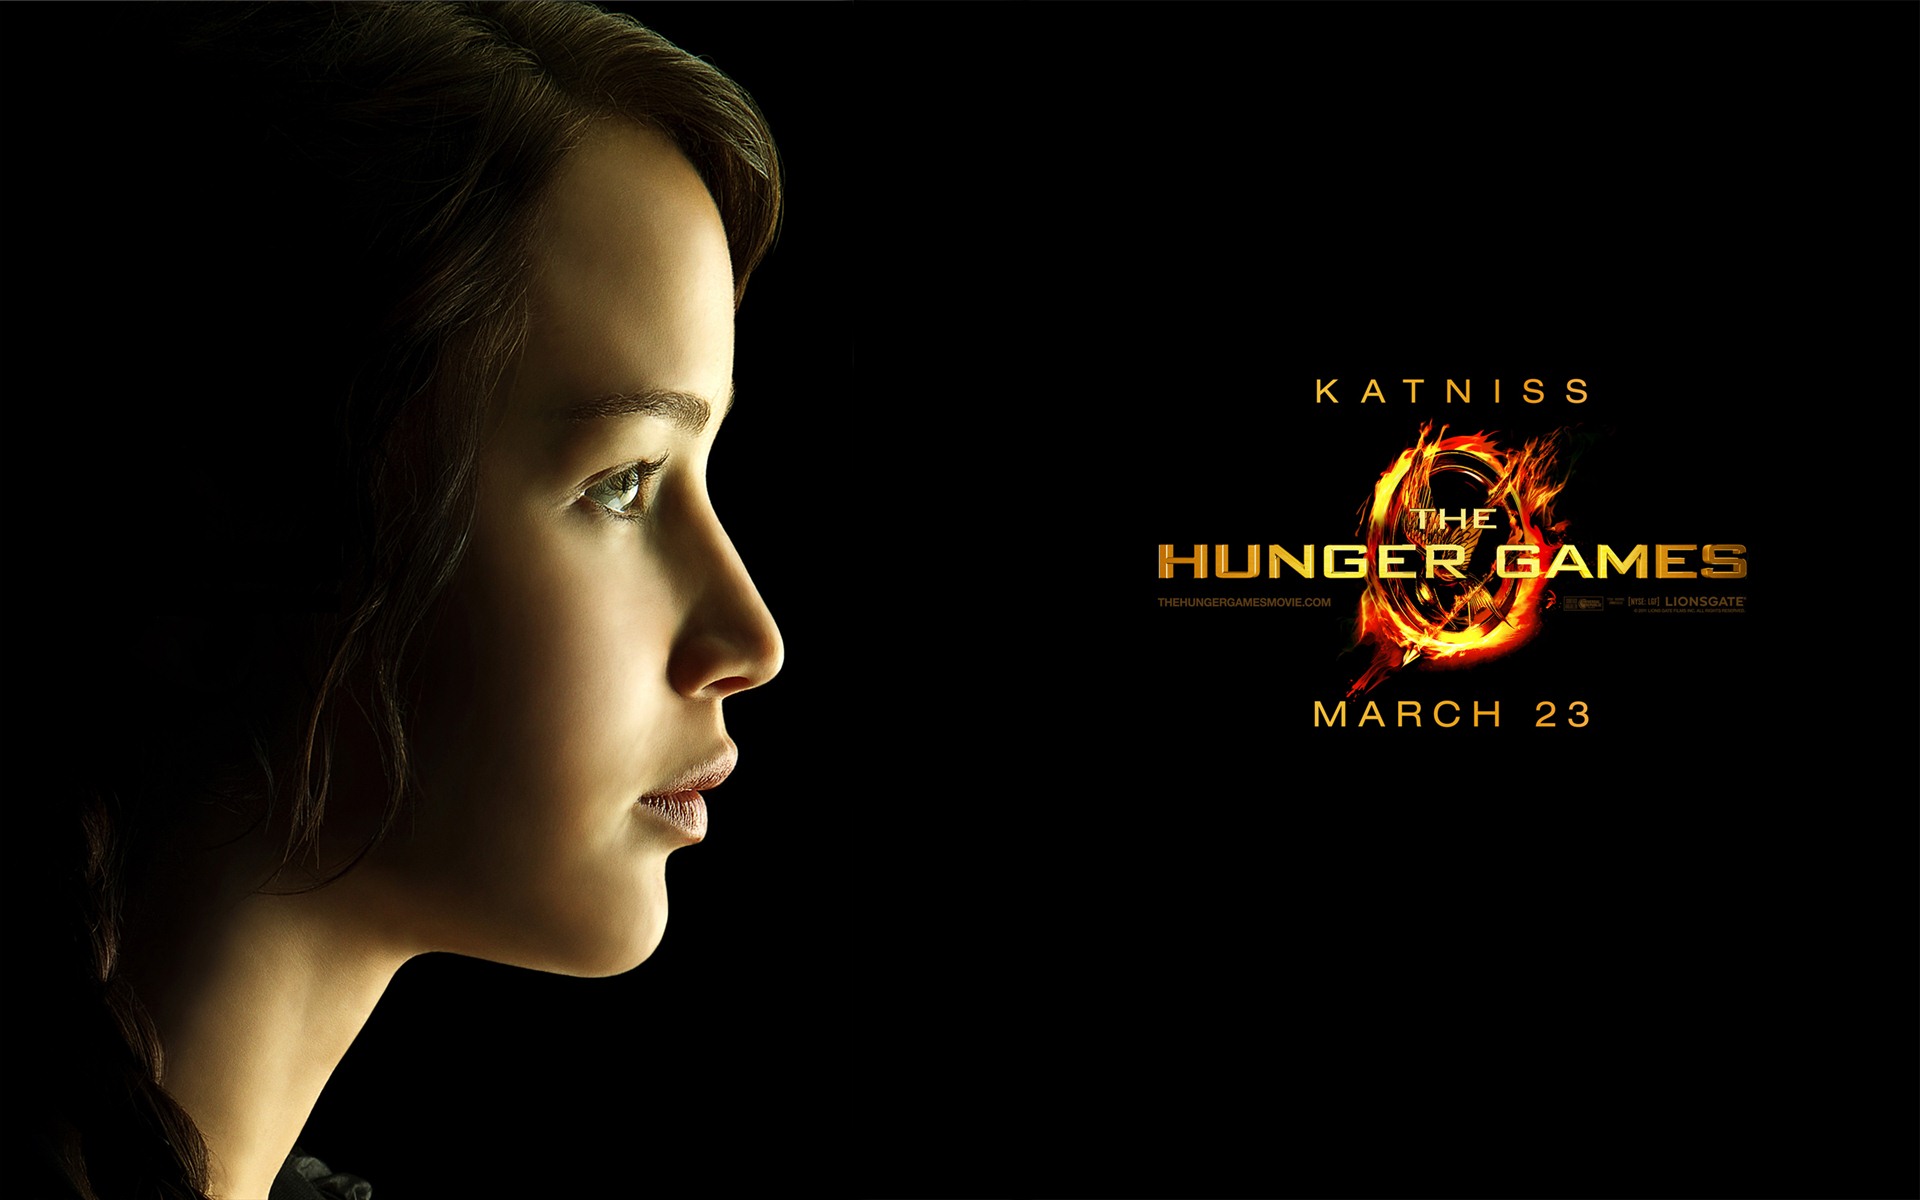 The Hunger Games HD wallpapers #14 - 1920x1200